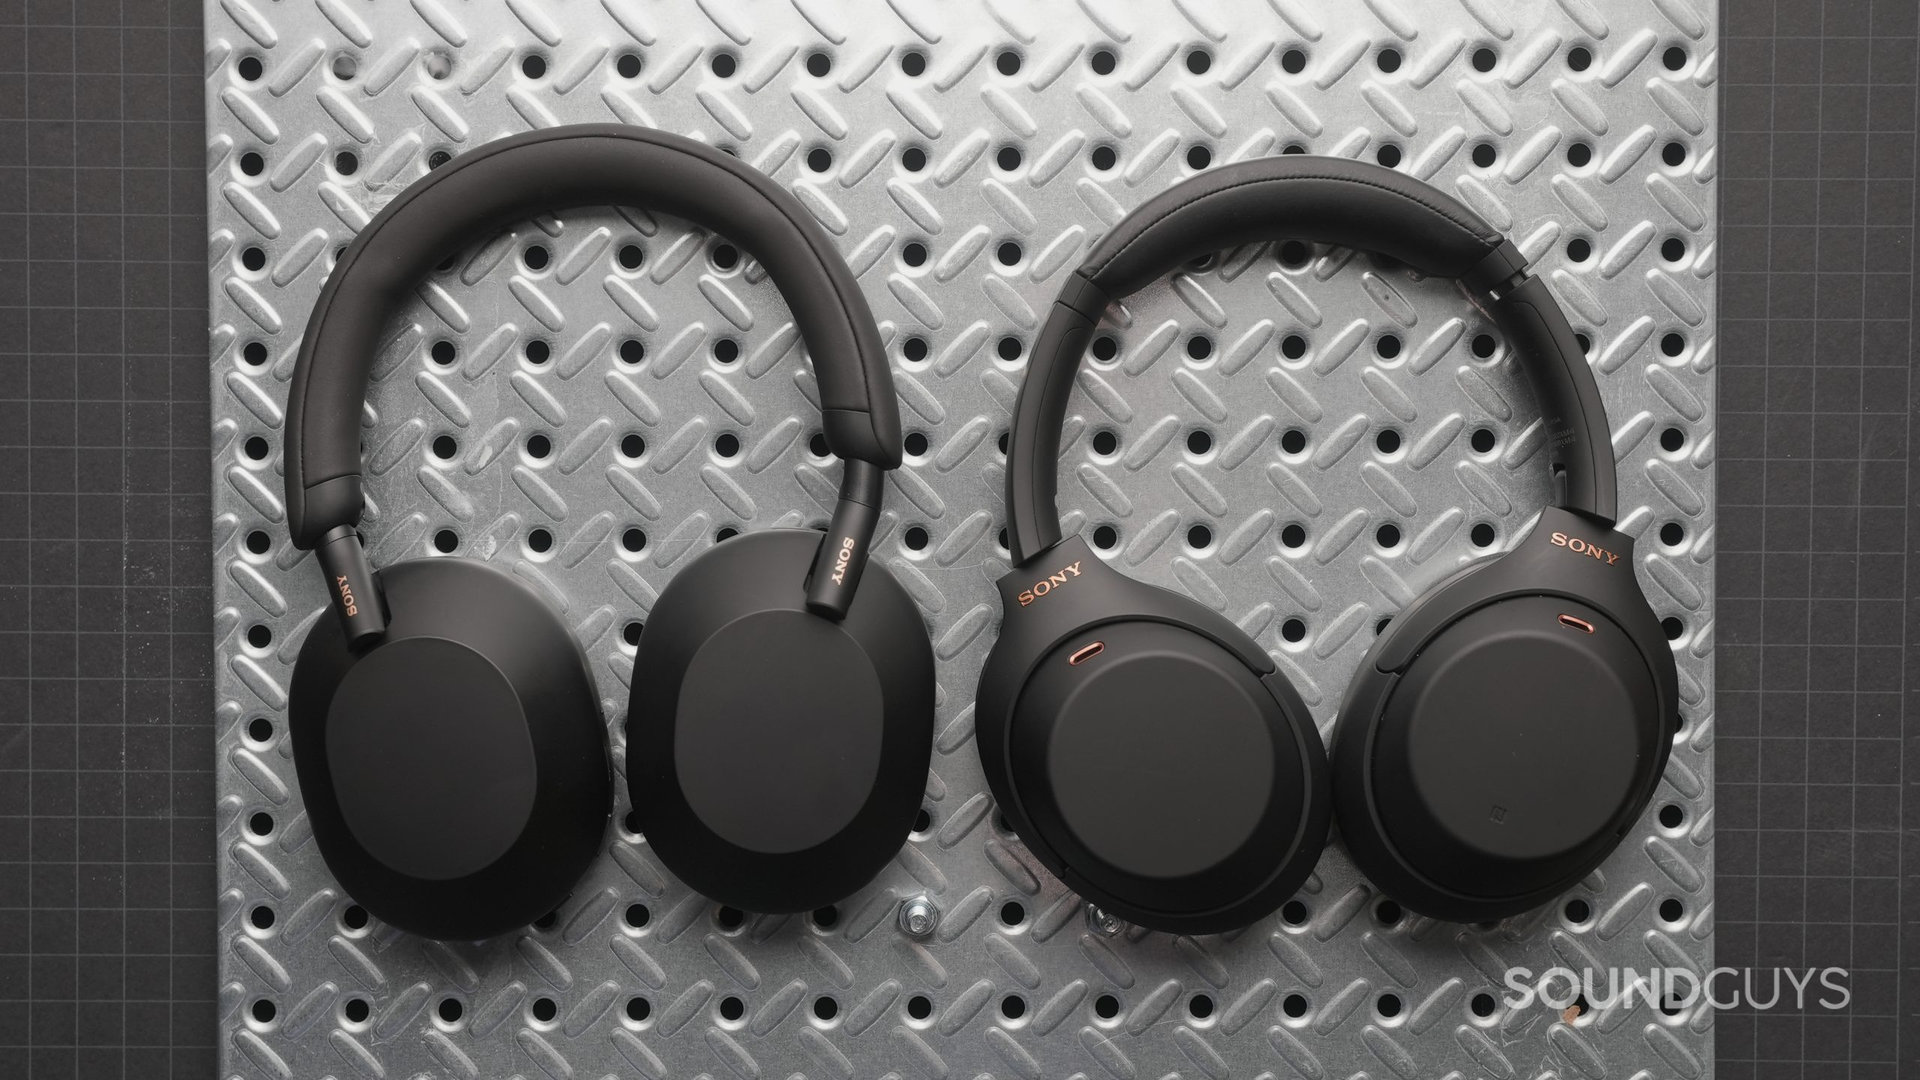 Sony headphone deals on both the Sony WH-1000XM5 and the Sony WH-1000XM4.